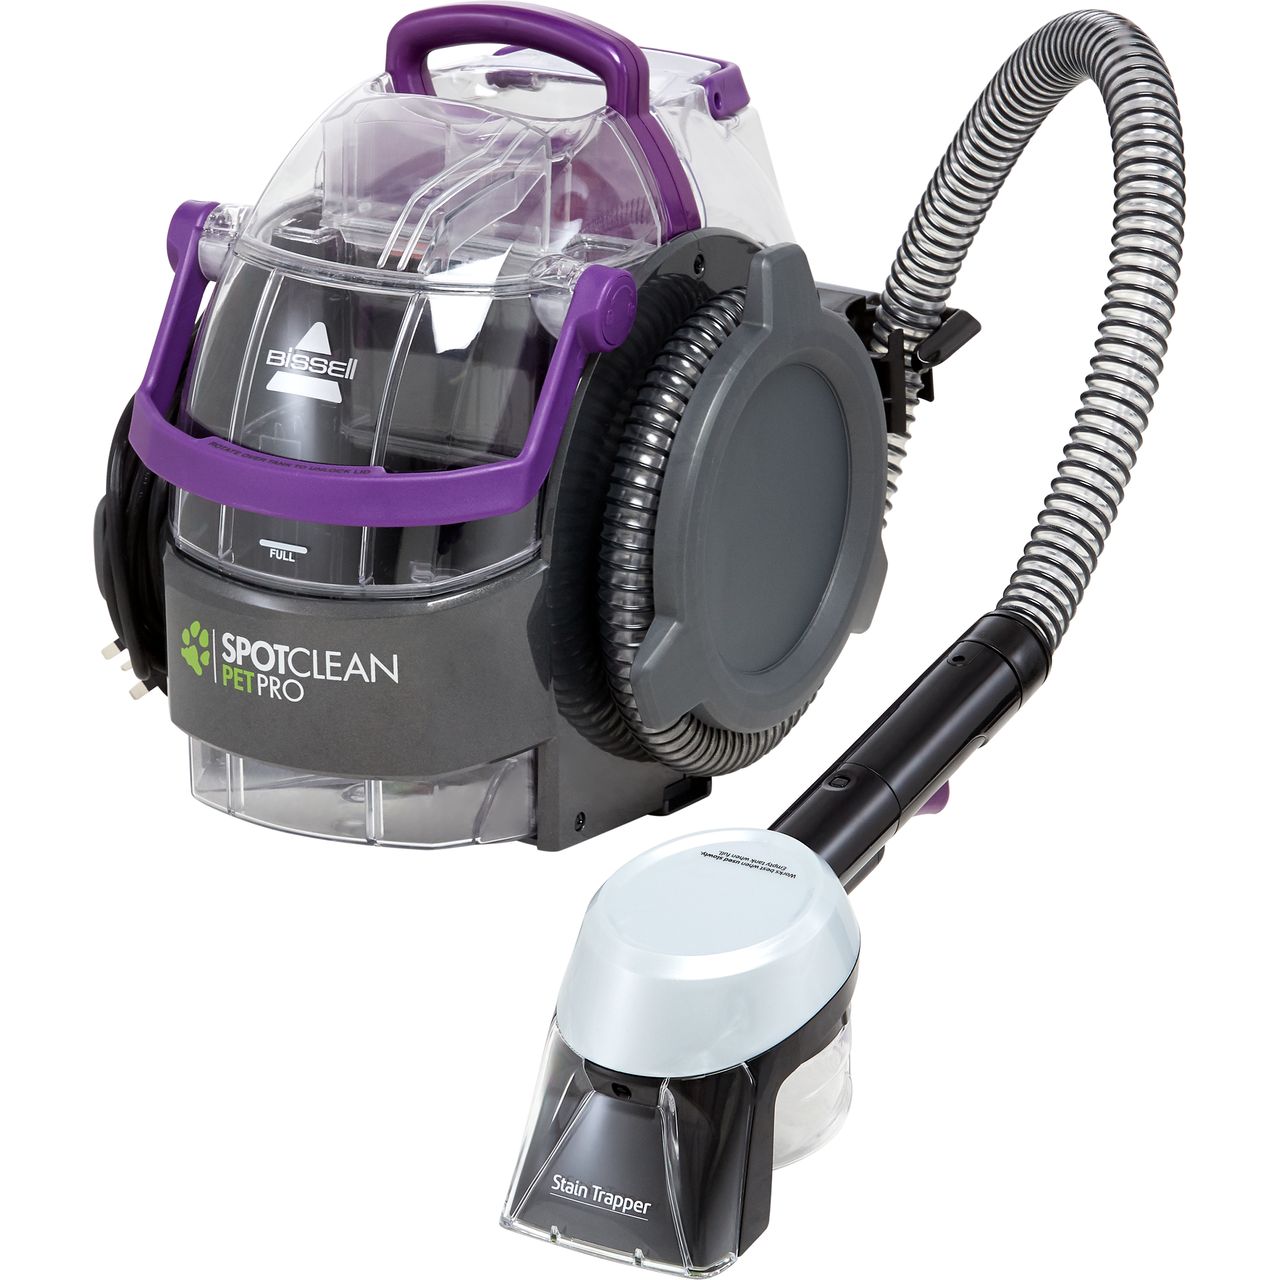 Bissell SpotClean Pet Pro Carpet Cleaner, 15588, Brand new, 3 Year  warranty 11120256734